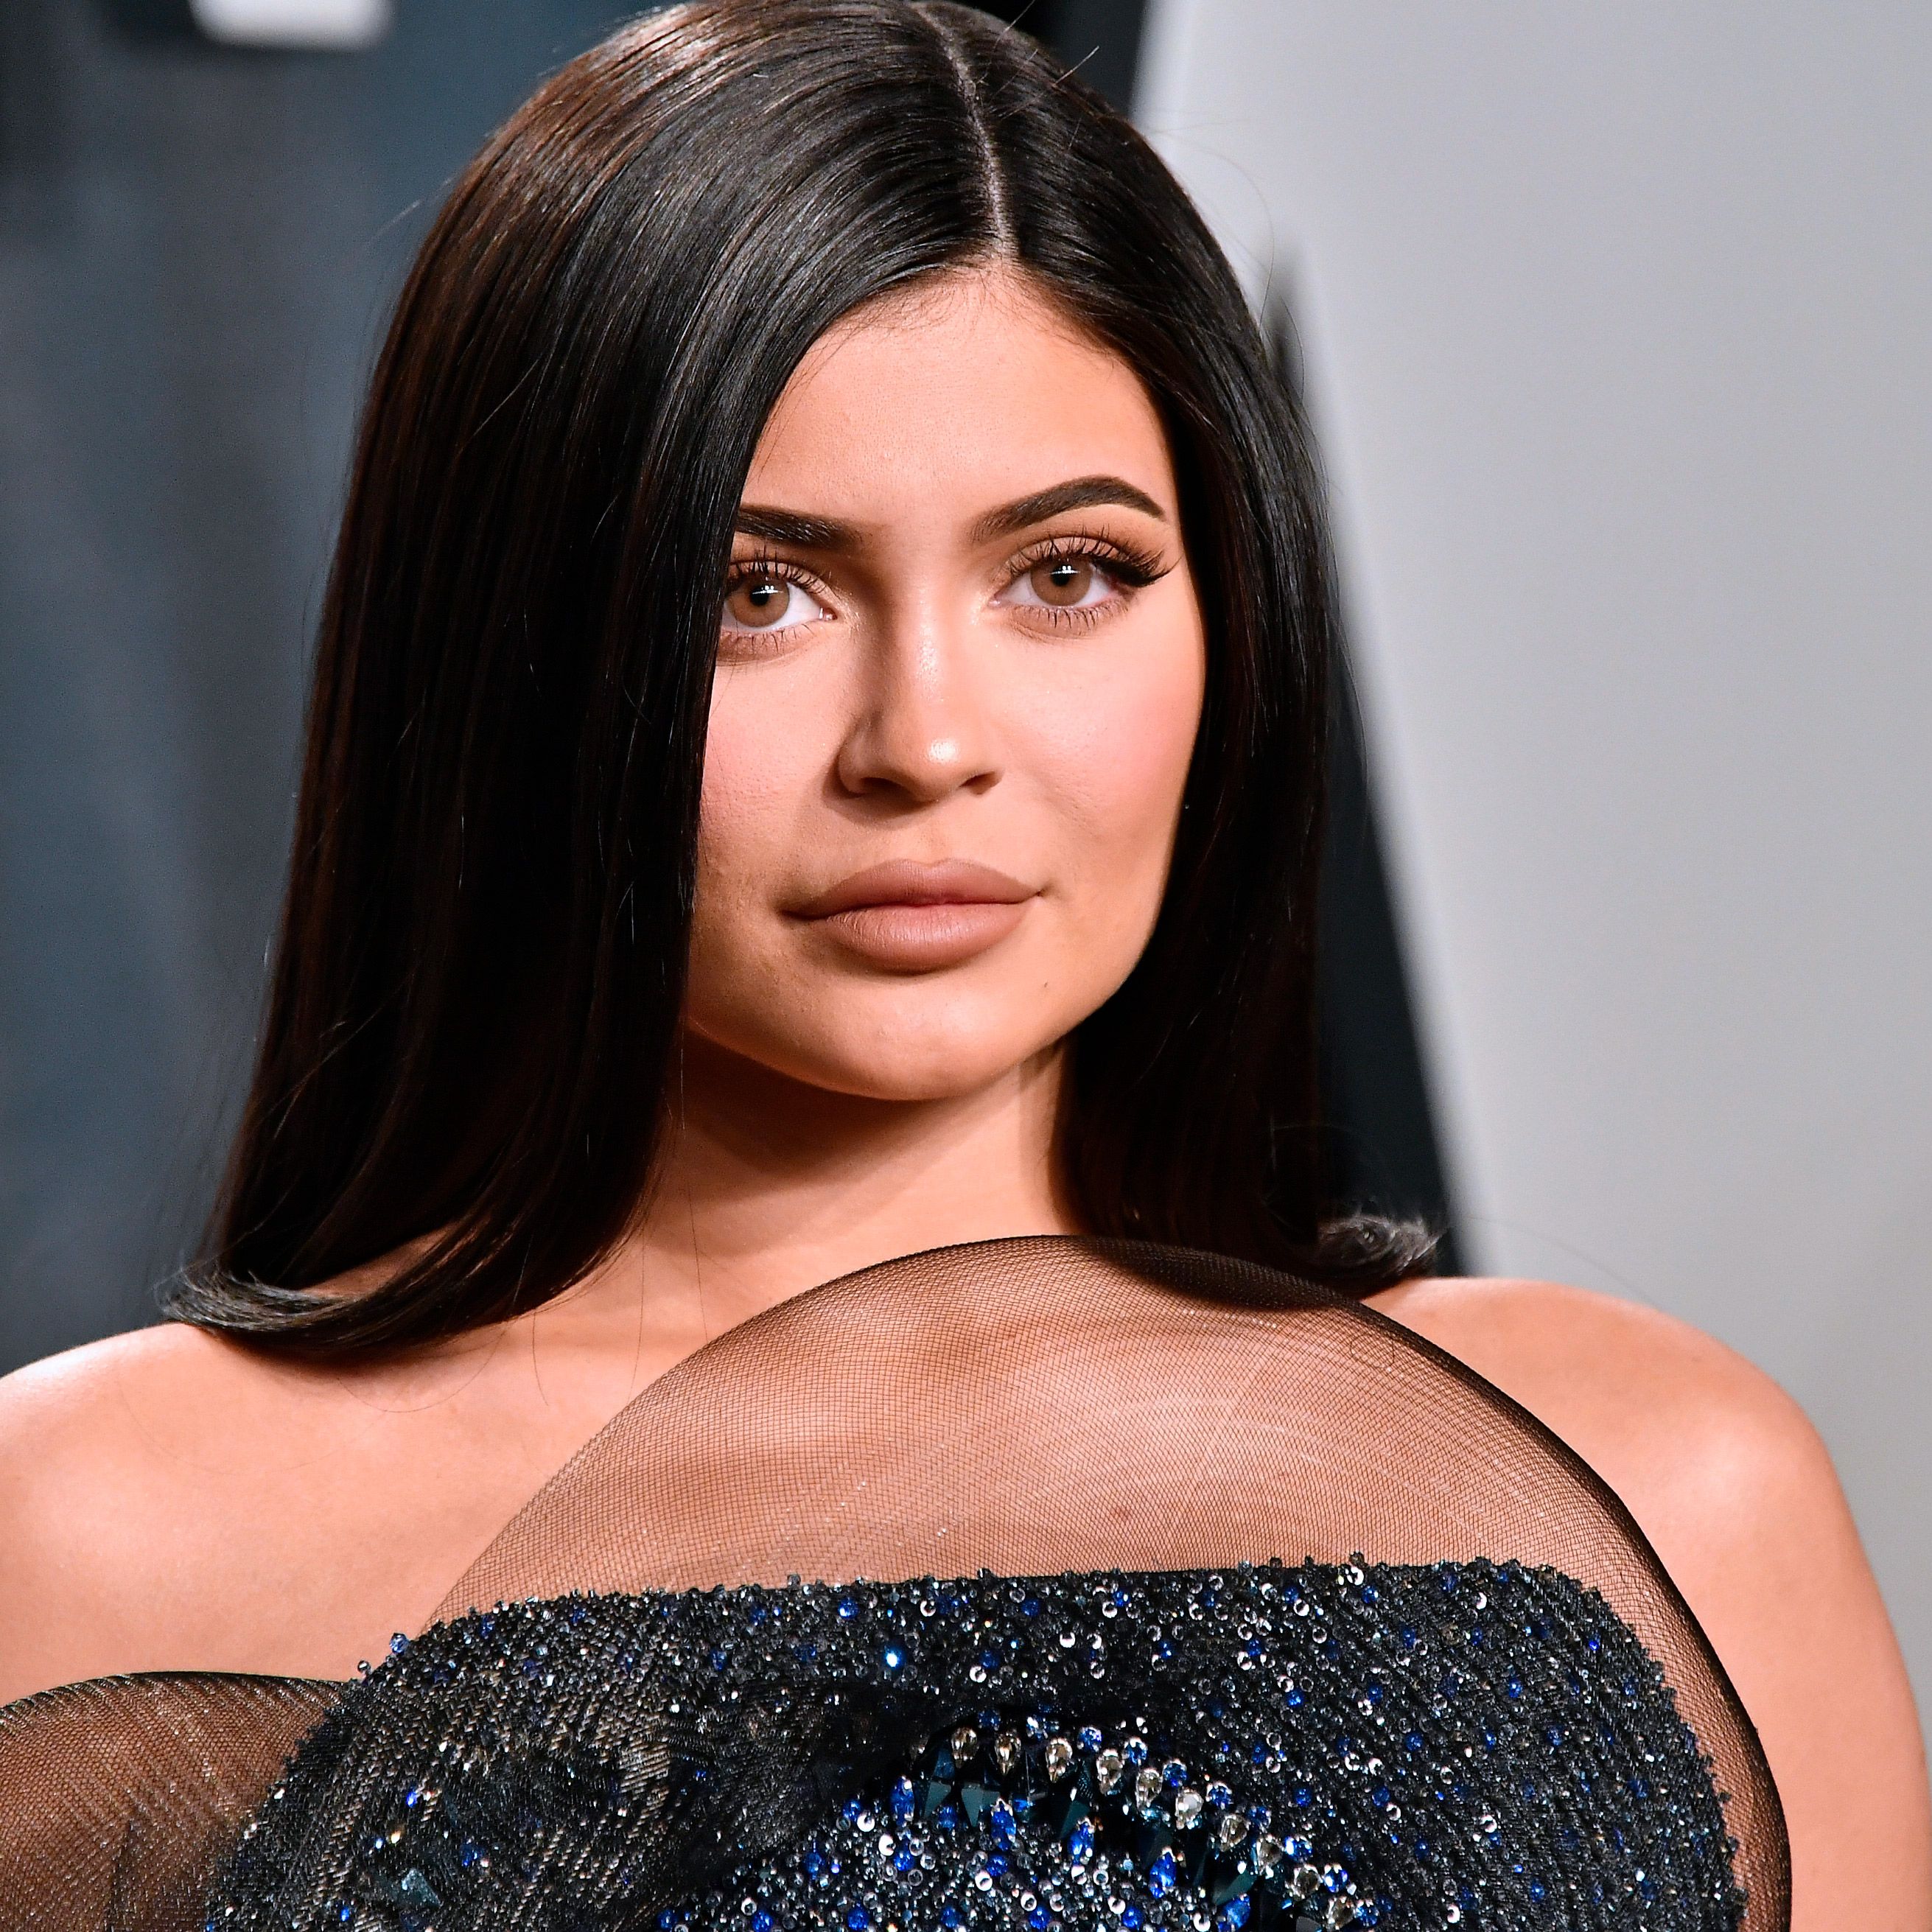 Kylie Jenner's Vintage Chanel Dress Is So '90s